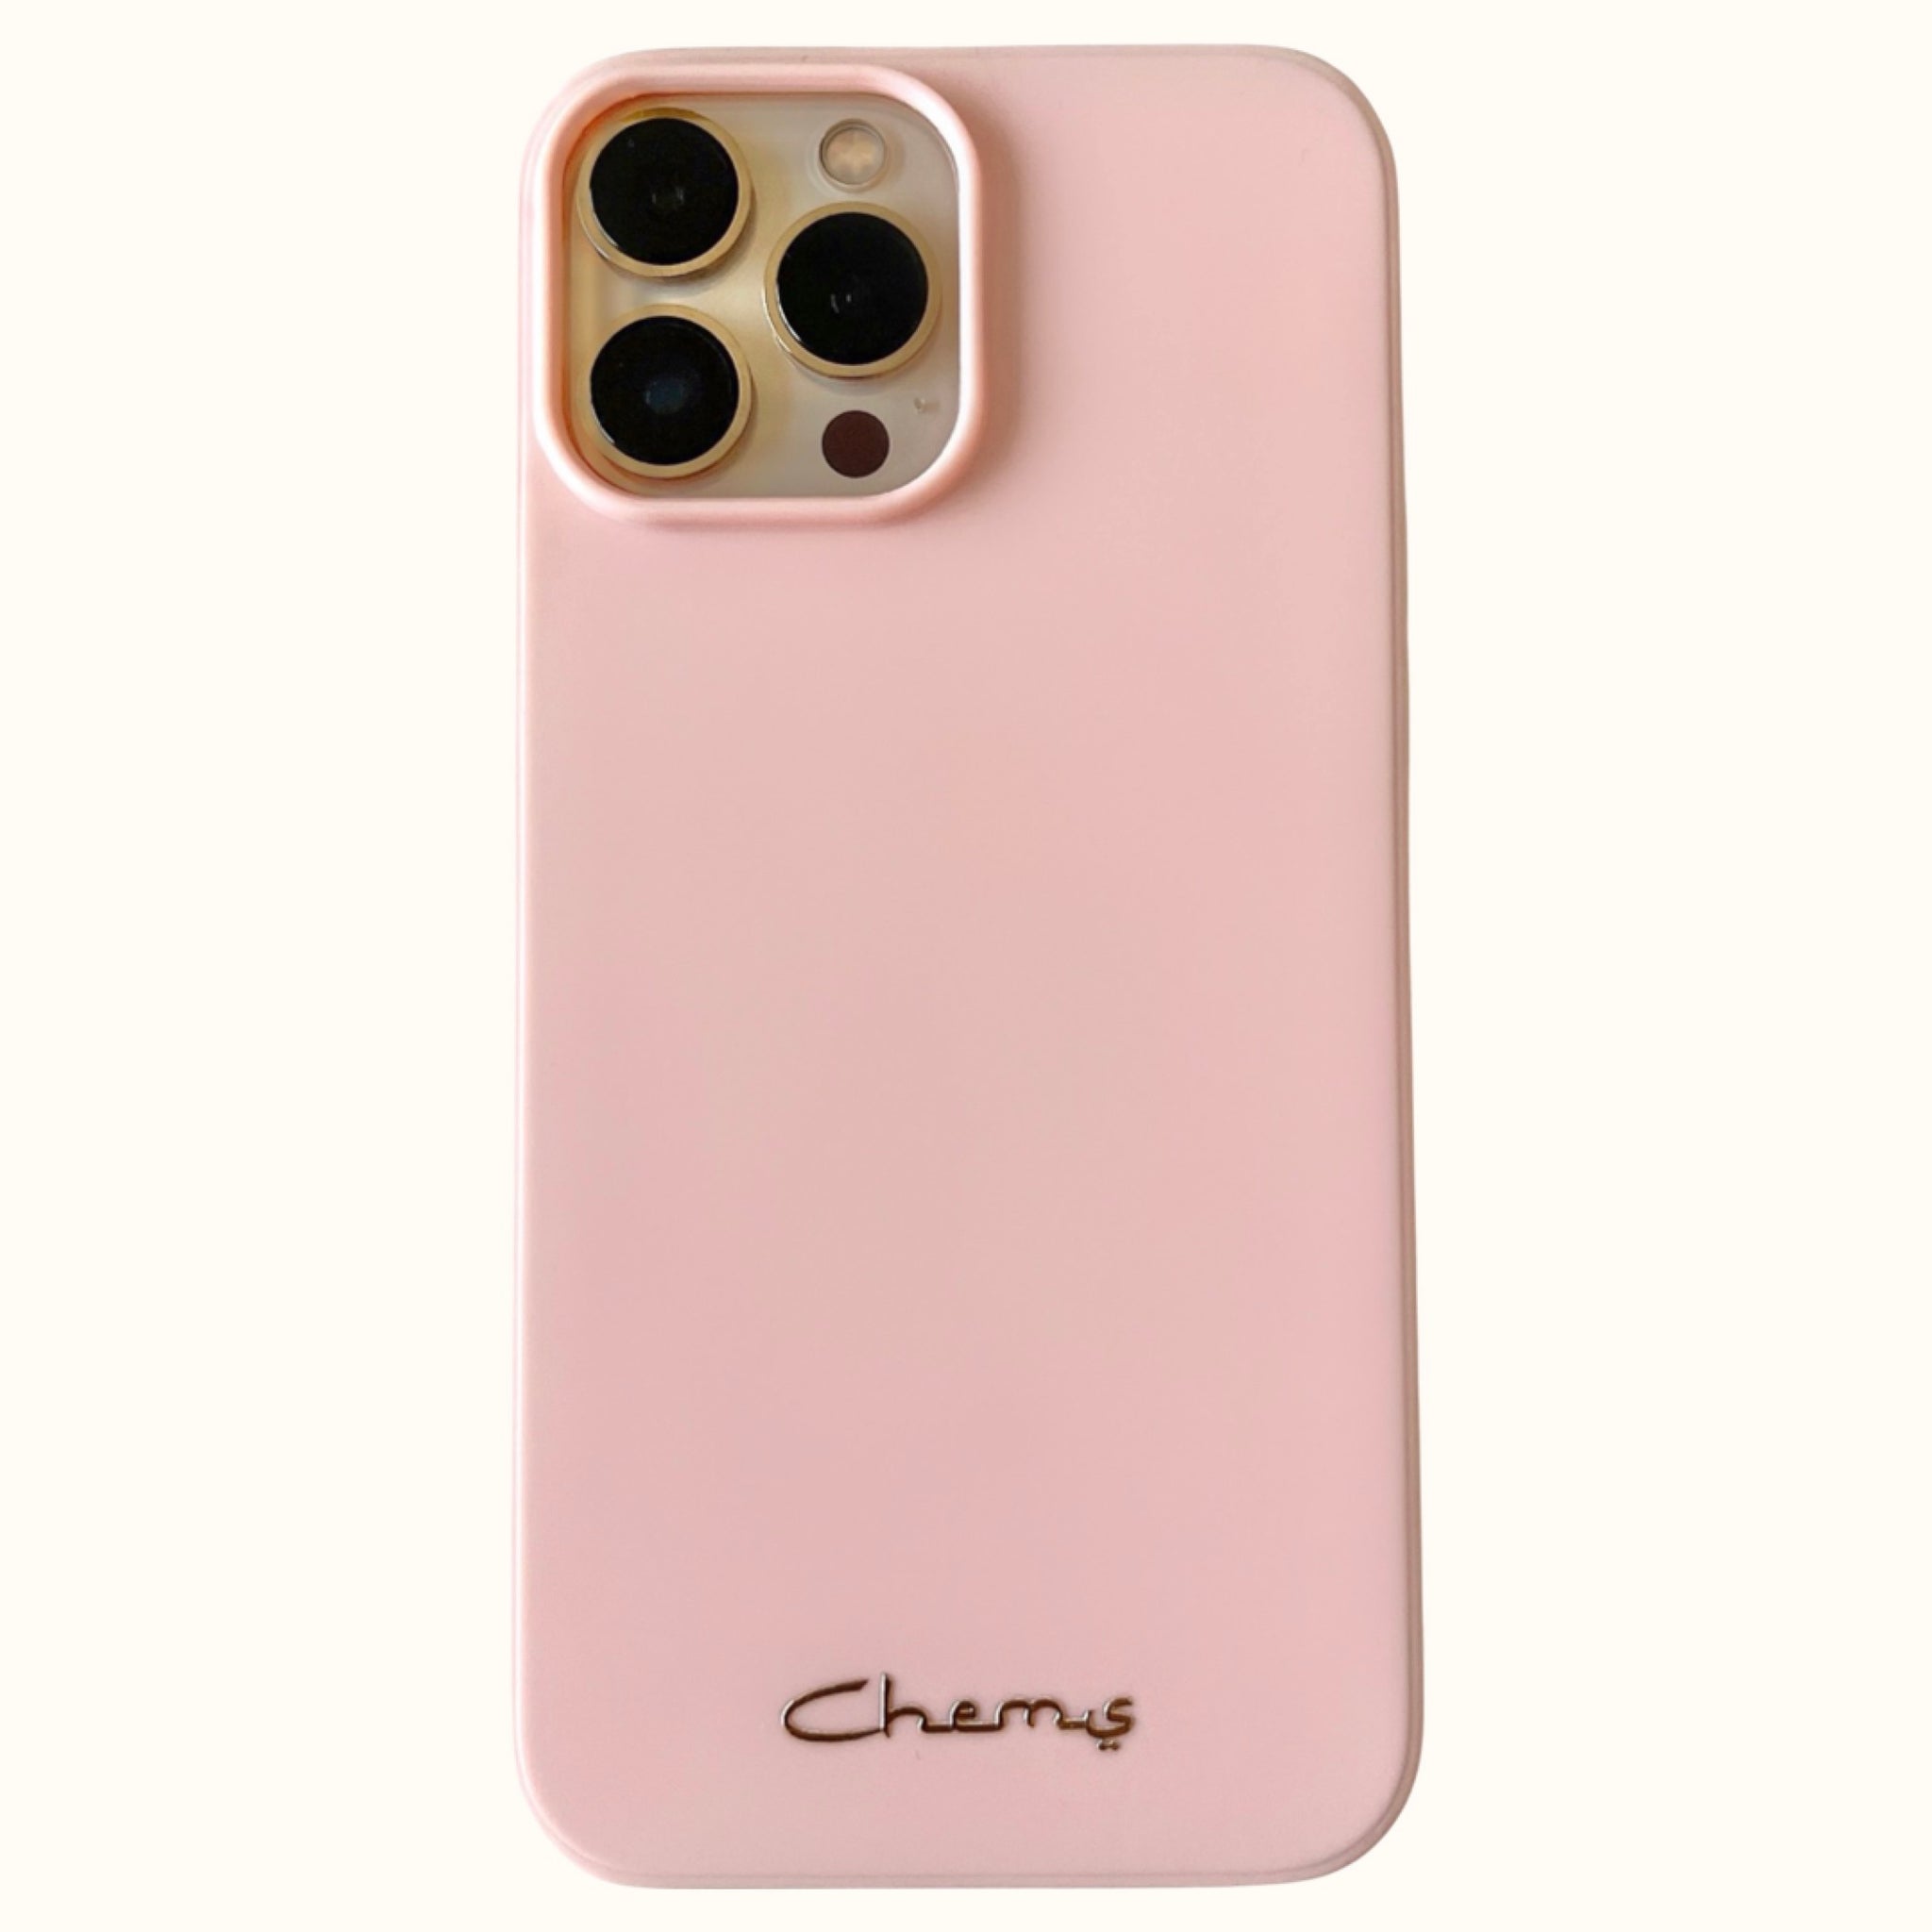 Case Baby Pink